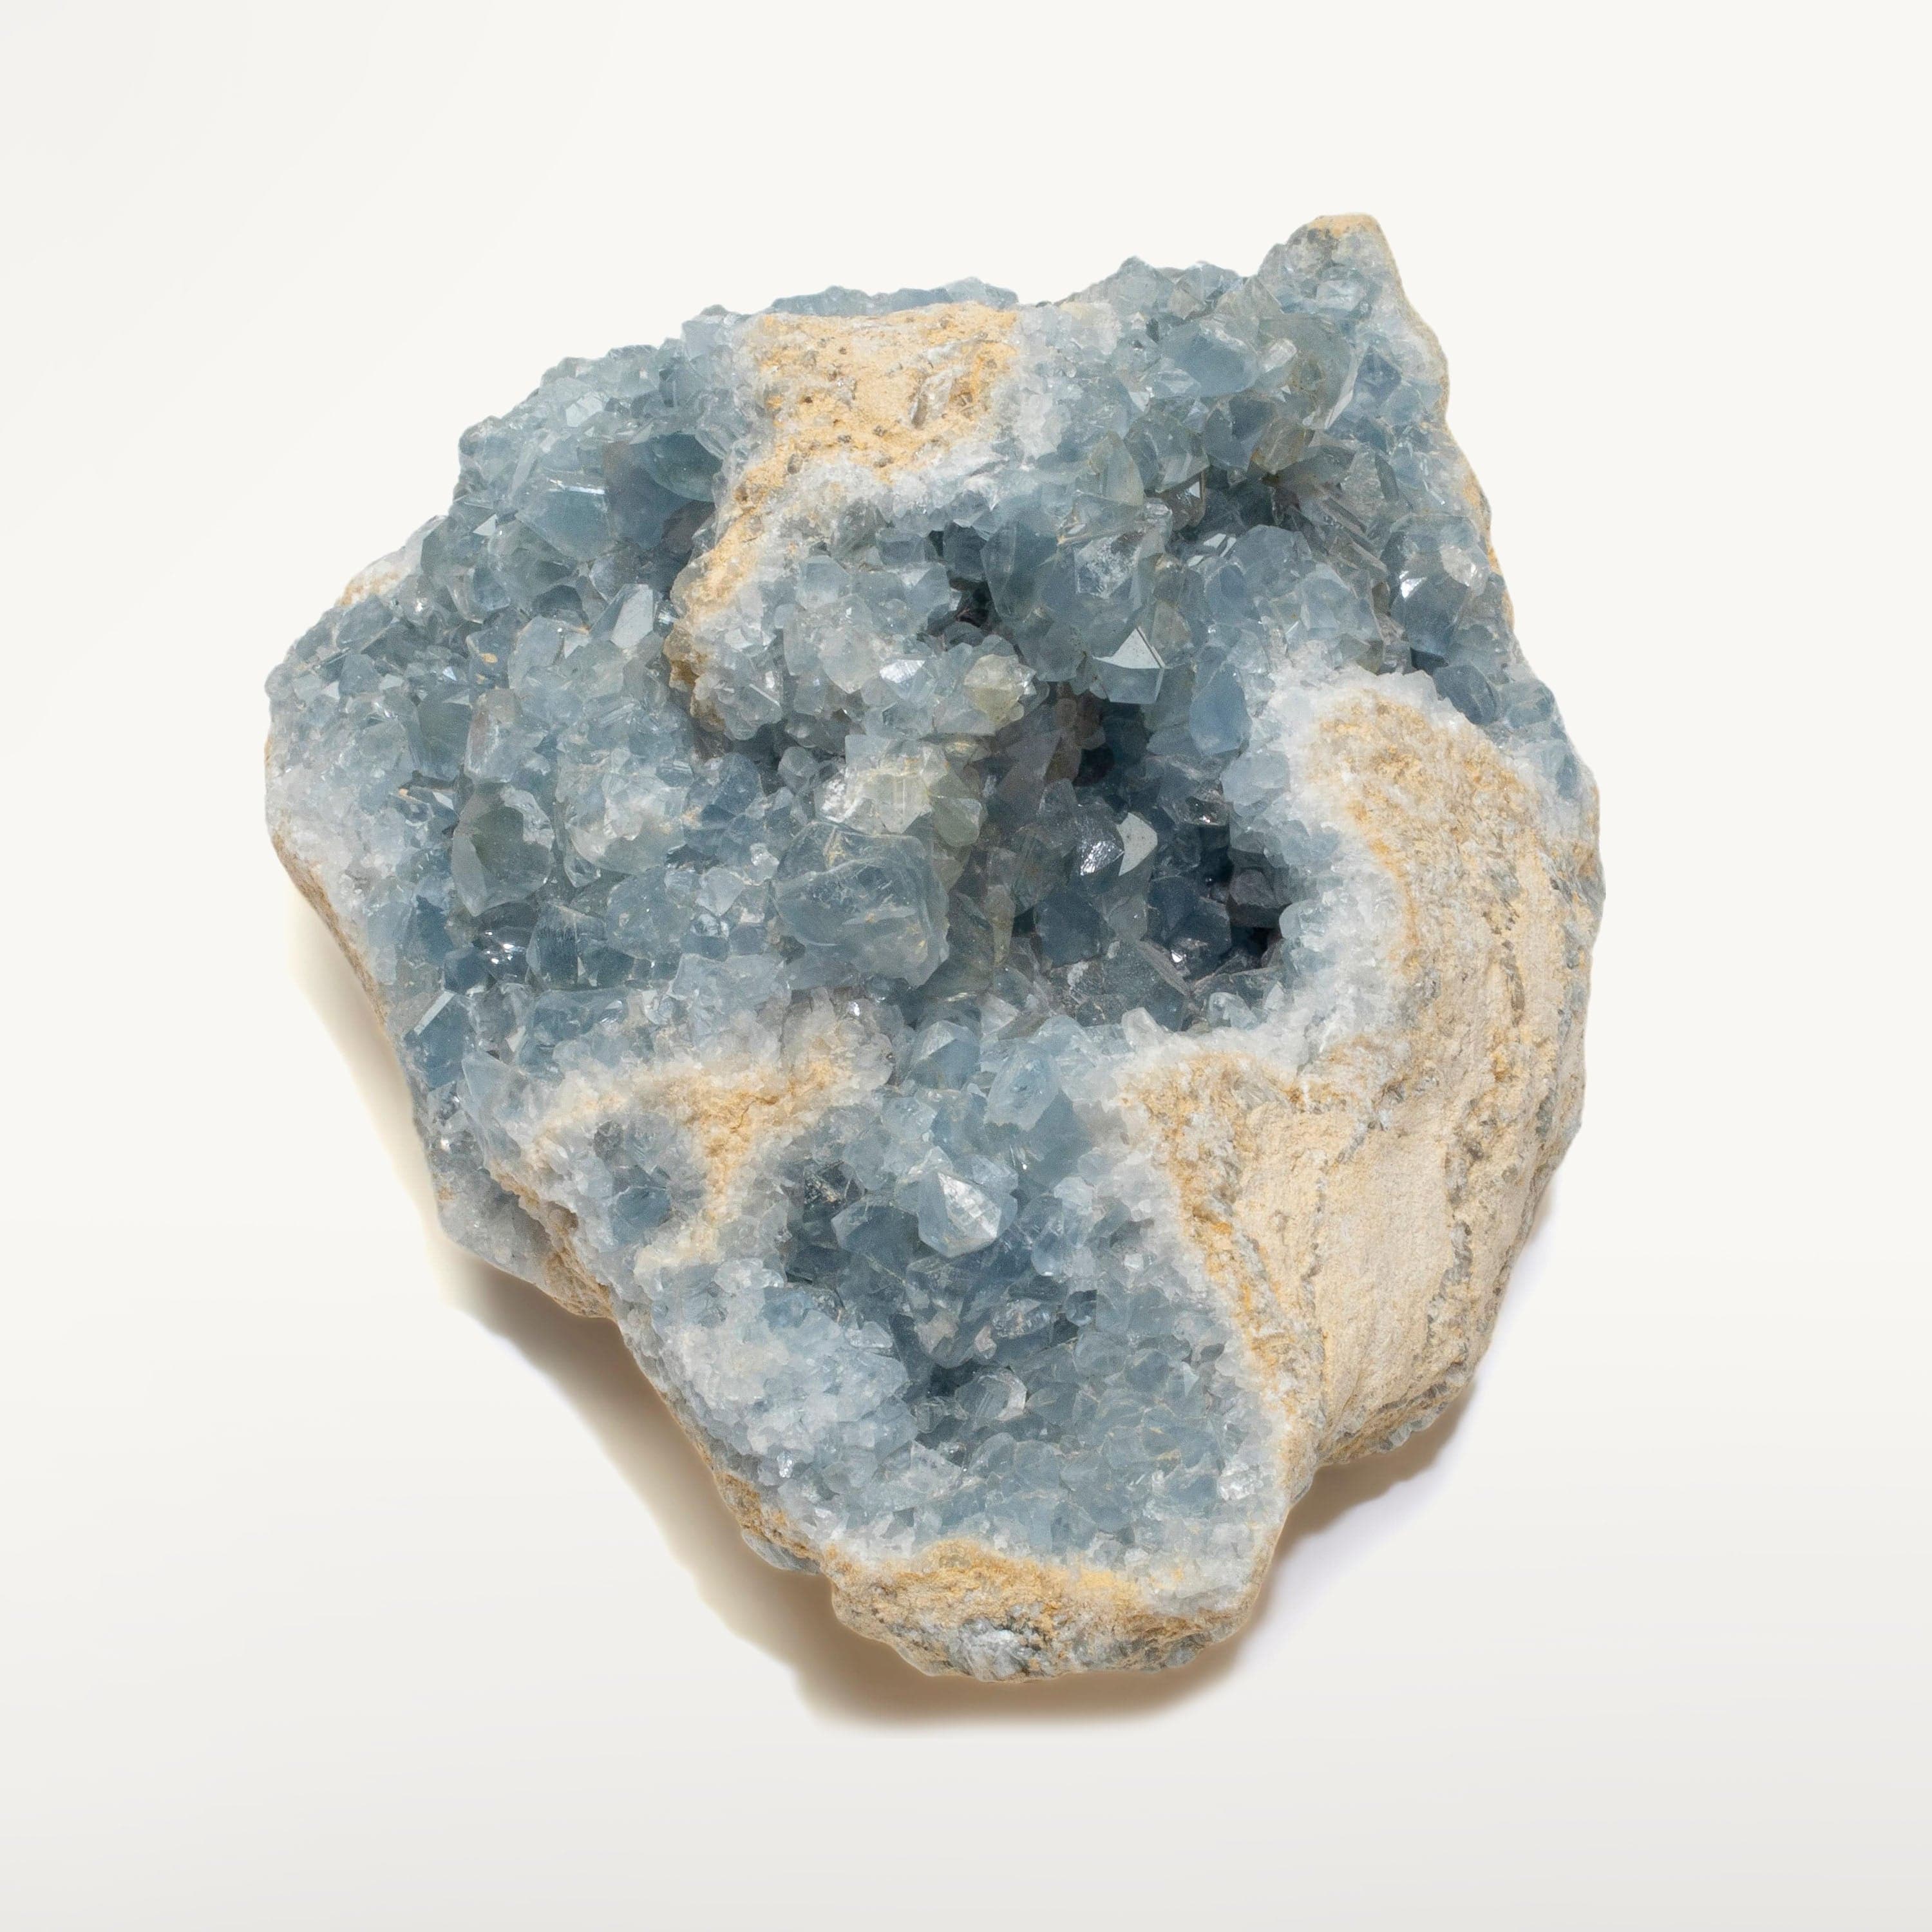 Kalifano Celestite Natural Celestite Crystal Cluster Geode from Madagascar - 11 in. CG1600.002